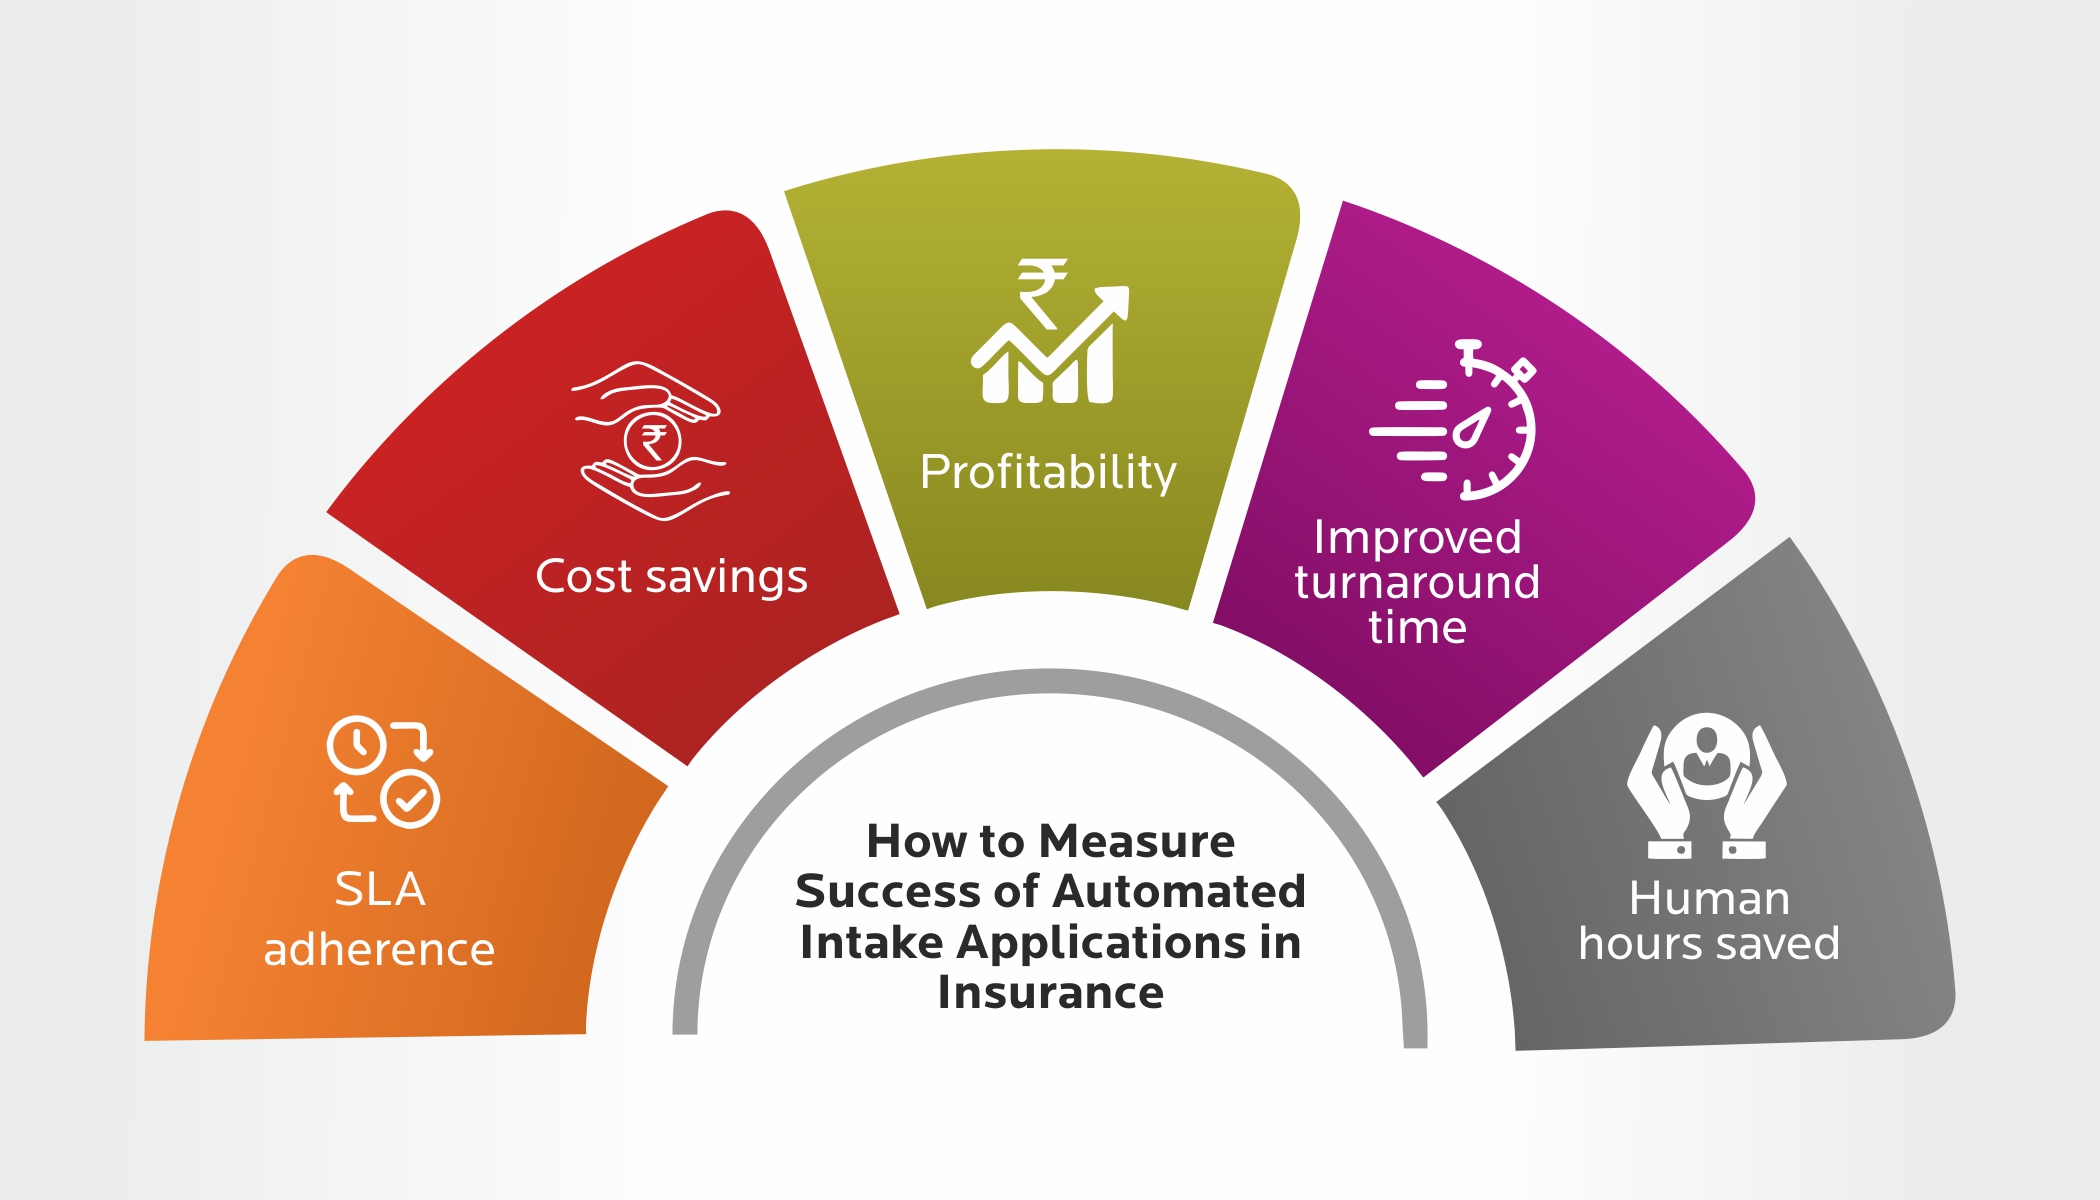 How to Measure Success of Automated Intake Applications in Insurance